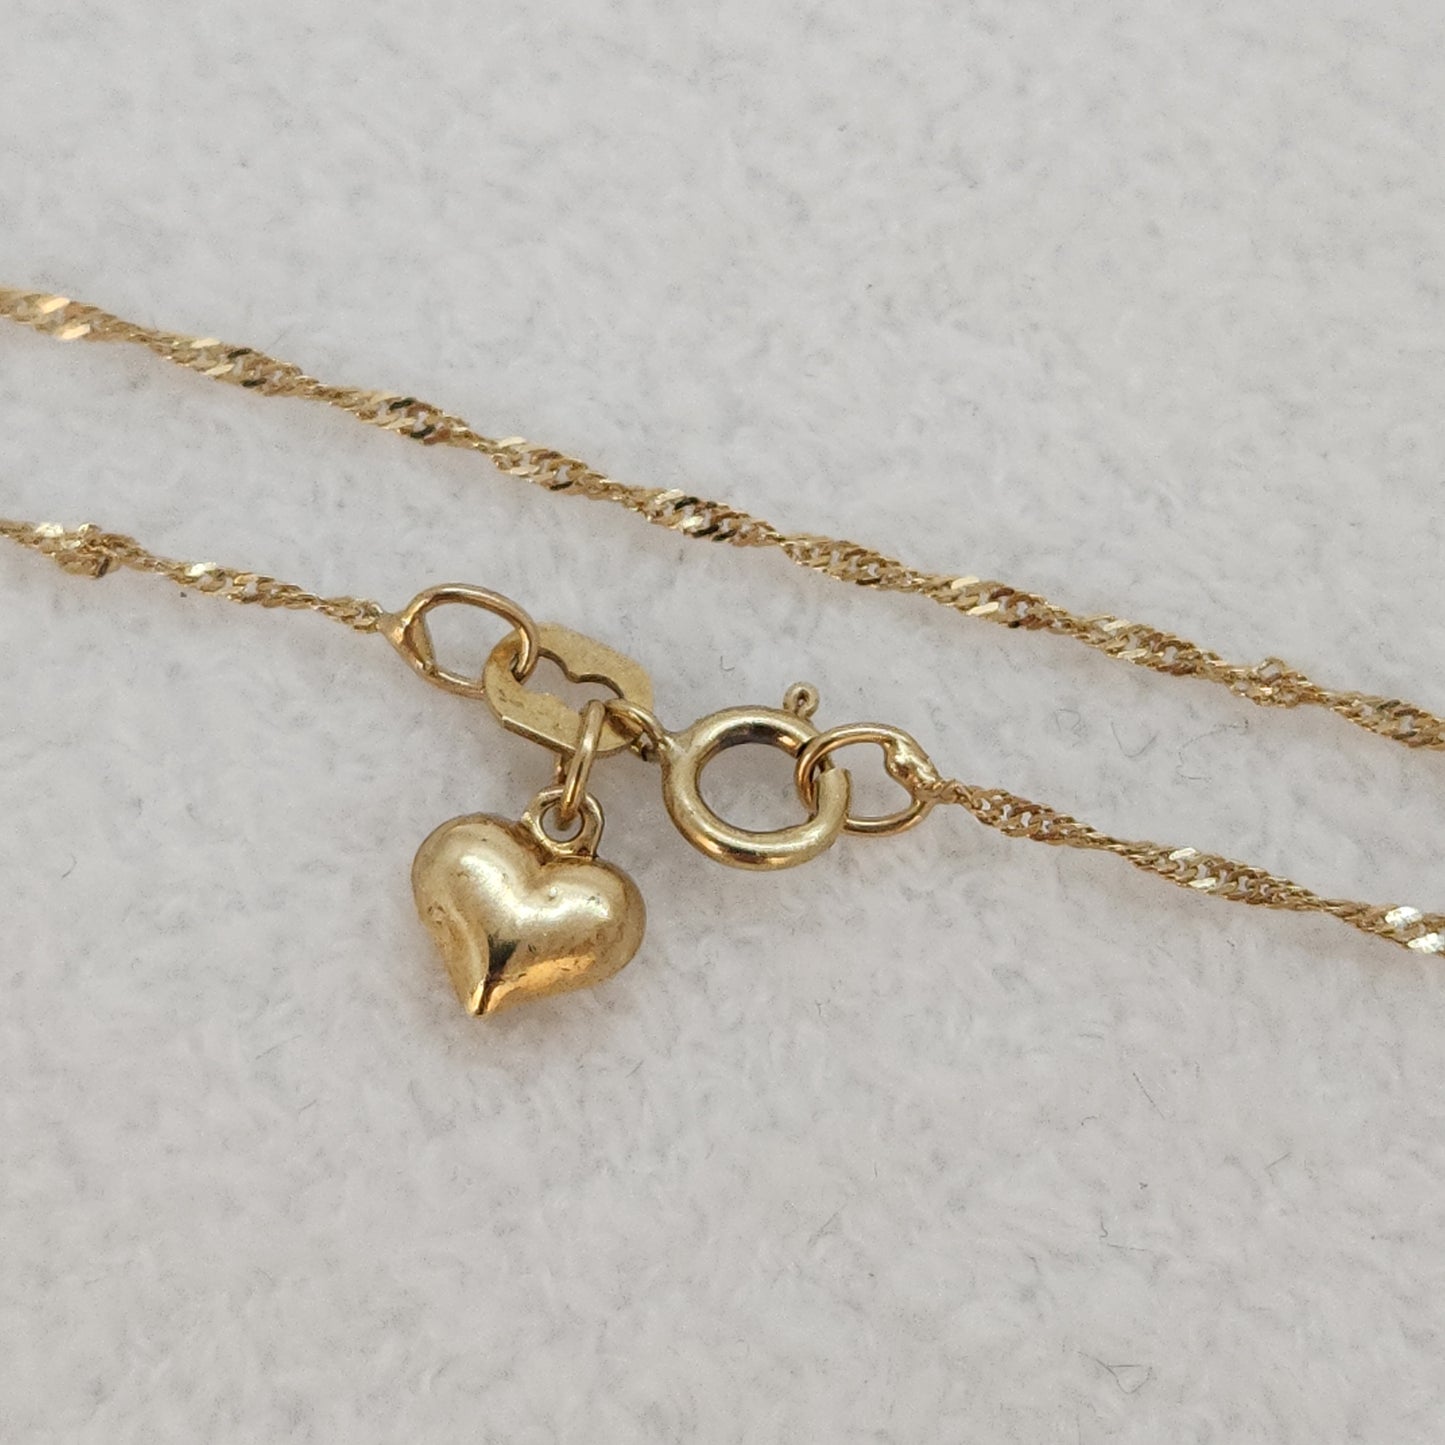 Anklet with Puffy Heart Charm